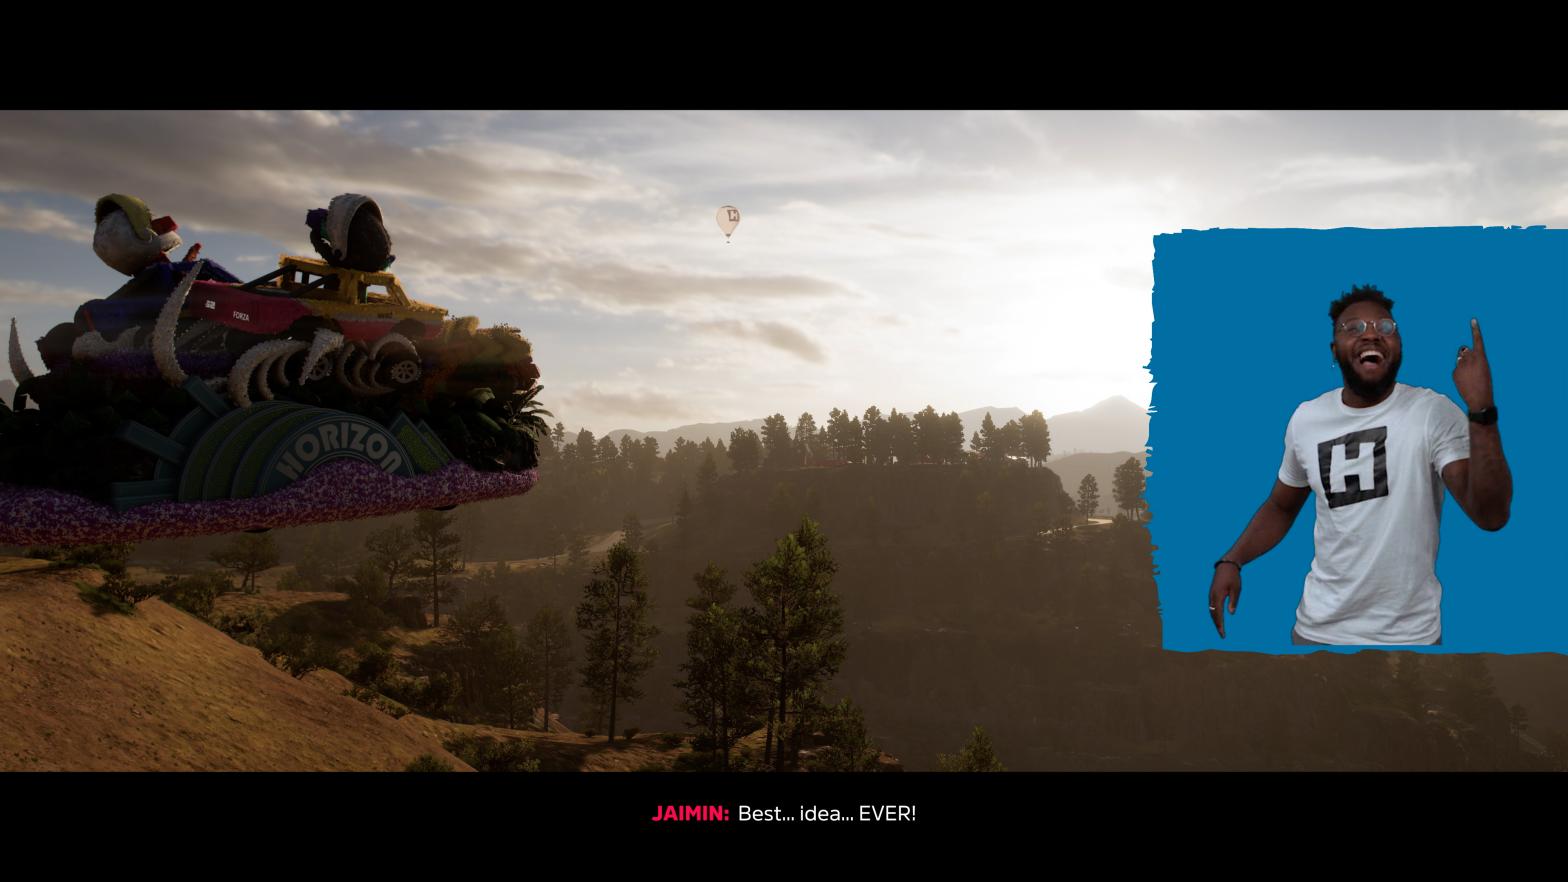 Forza Horizon 5 BSL sign language interpreter signs "Best Idea Ever" while a parade float jumps off a cliff